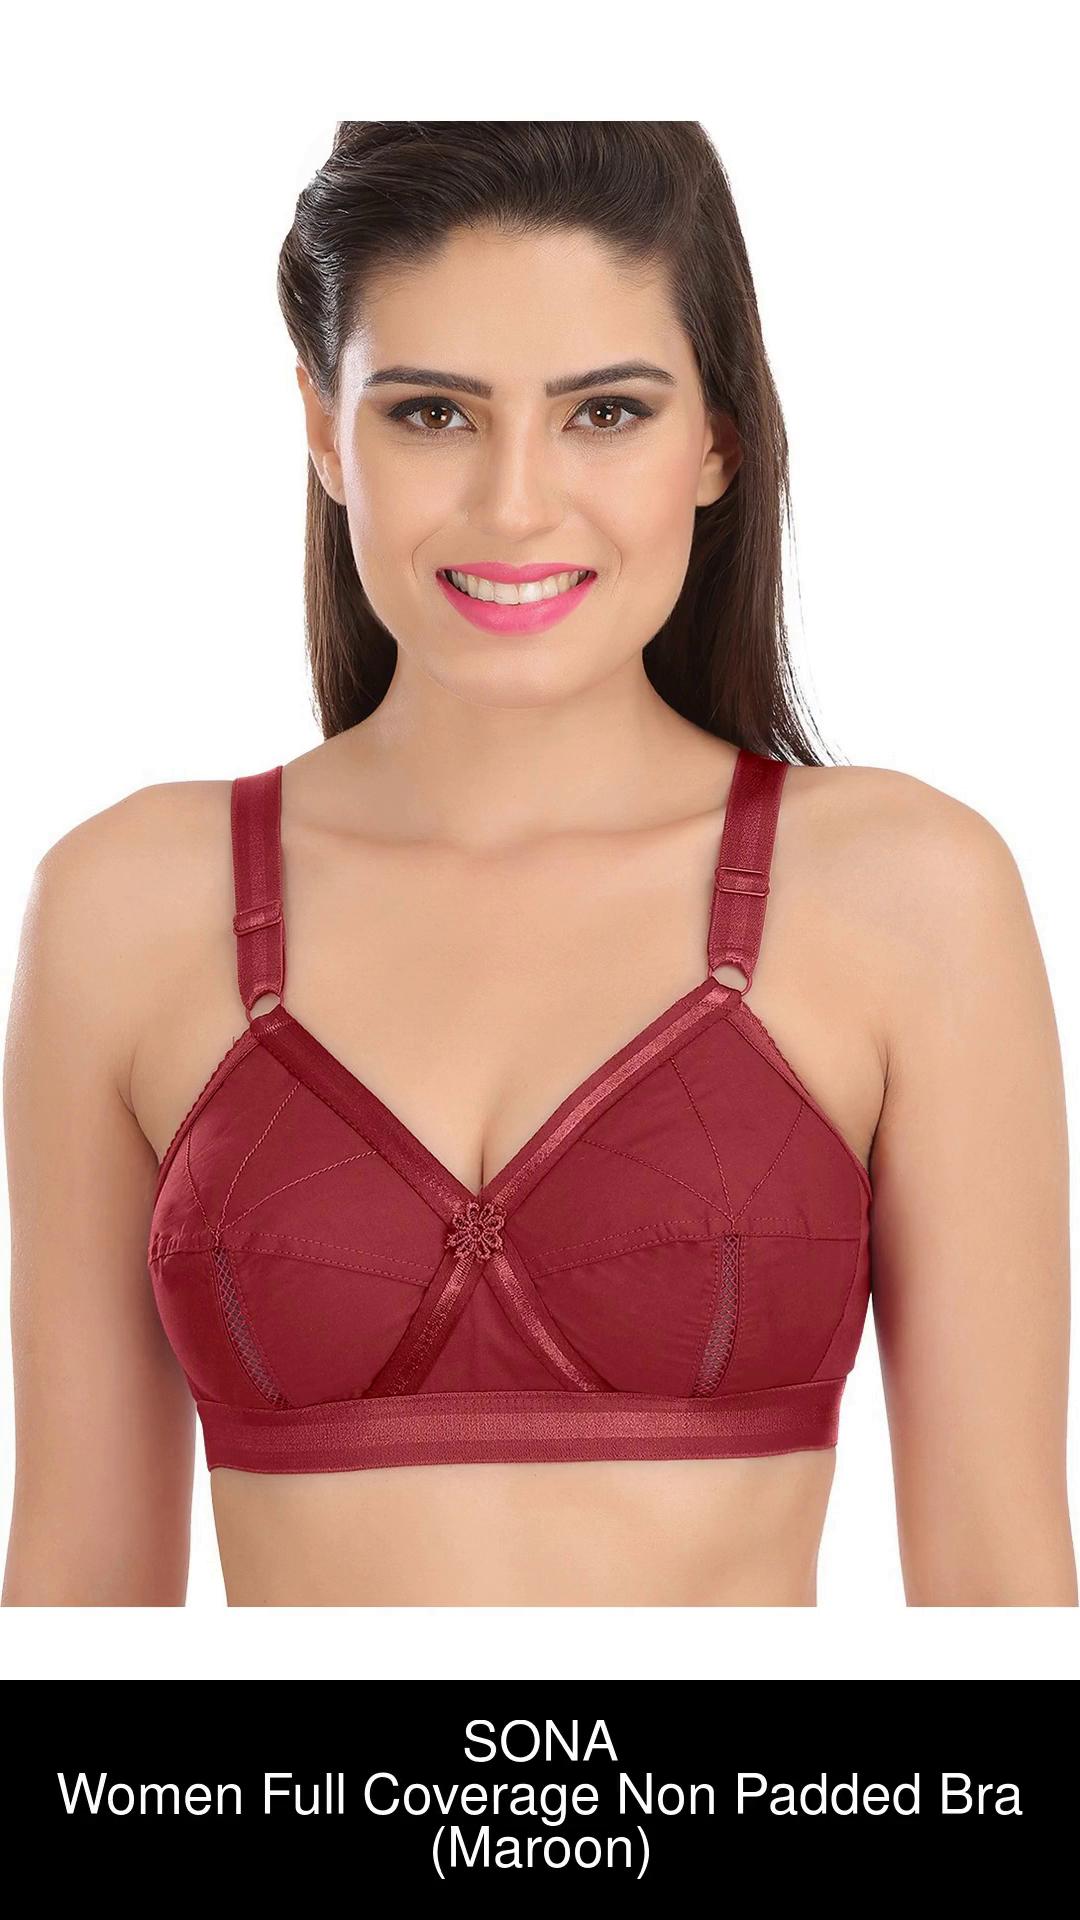 SONA Sona Perfecto Women Minimizer Non Padded Bra - Buy SONA Sona Perfecto  Women Minimizer Non Padded Bra Online at Best Prices in India